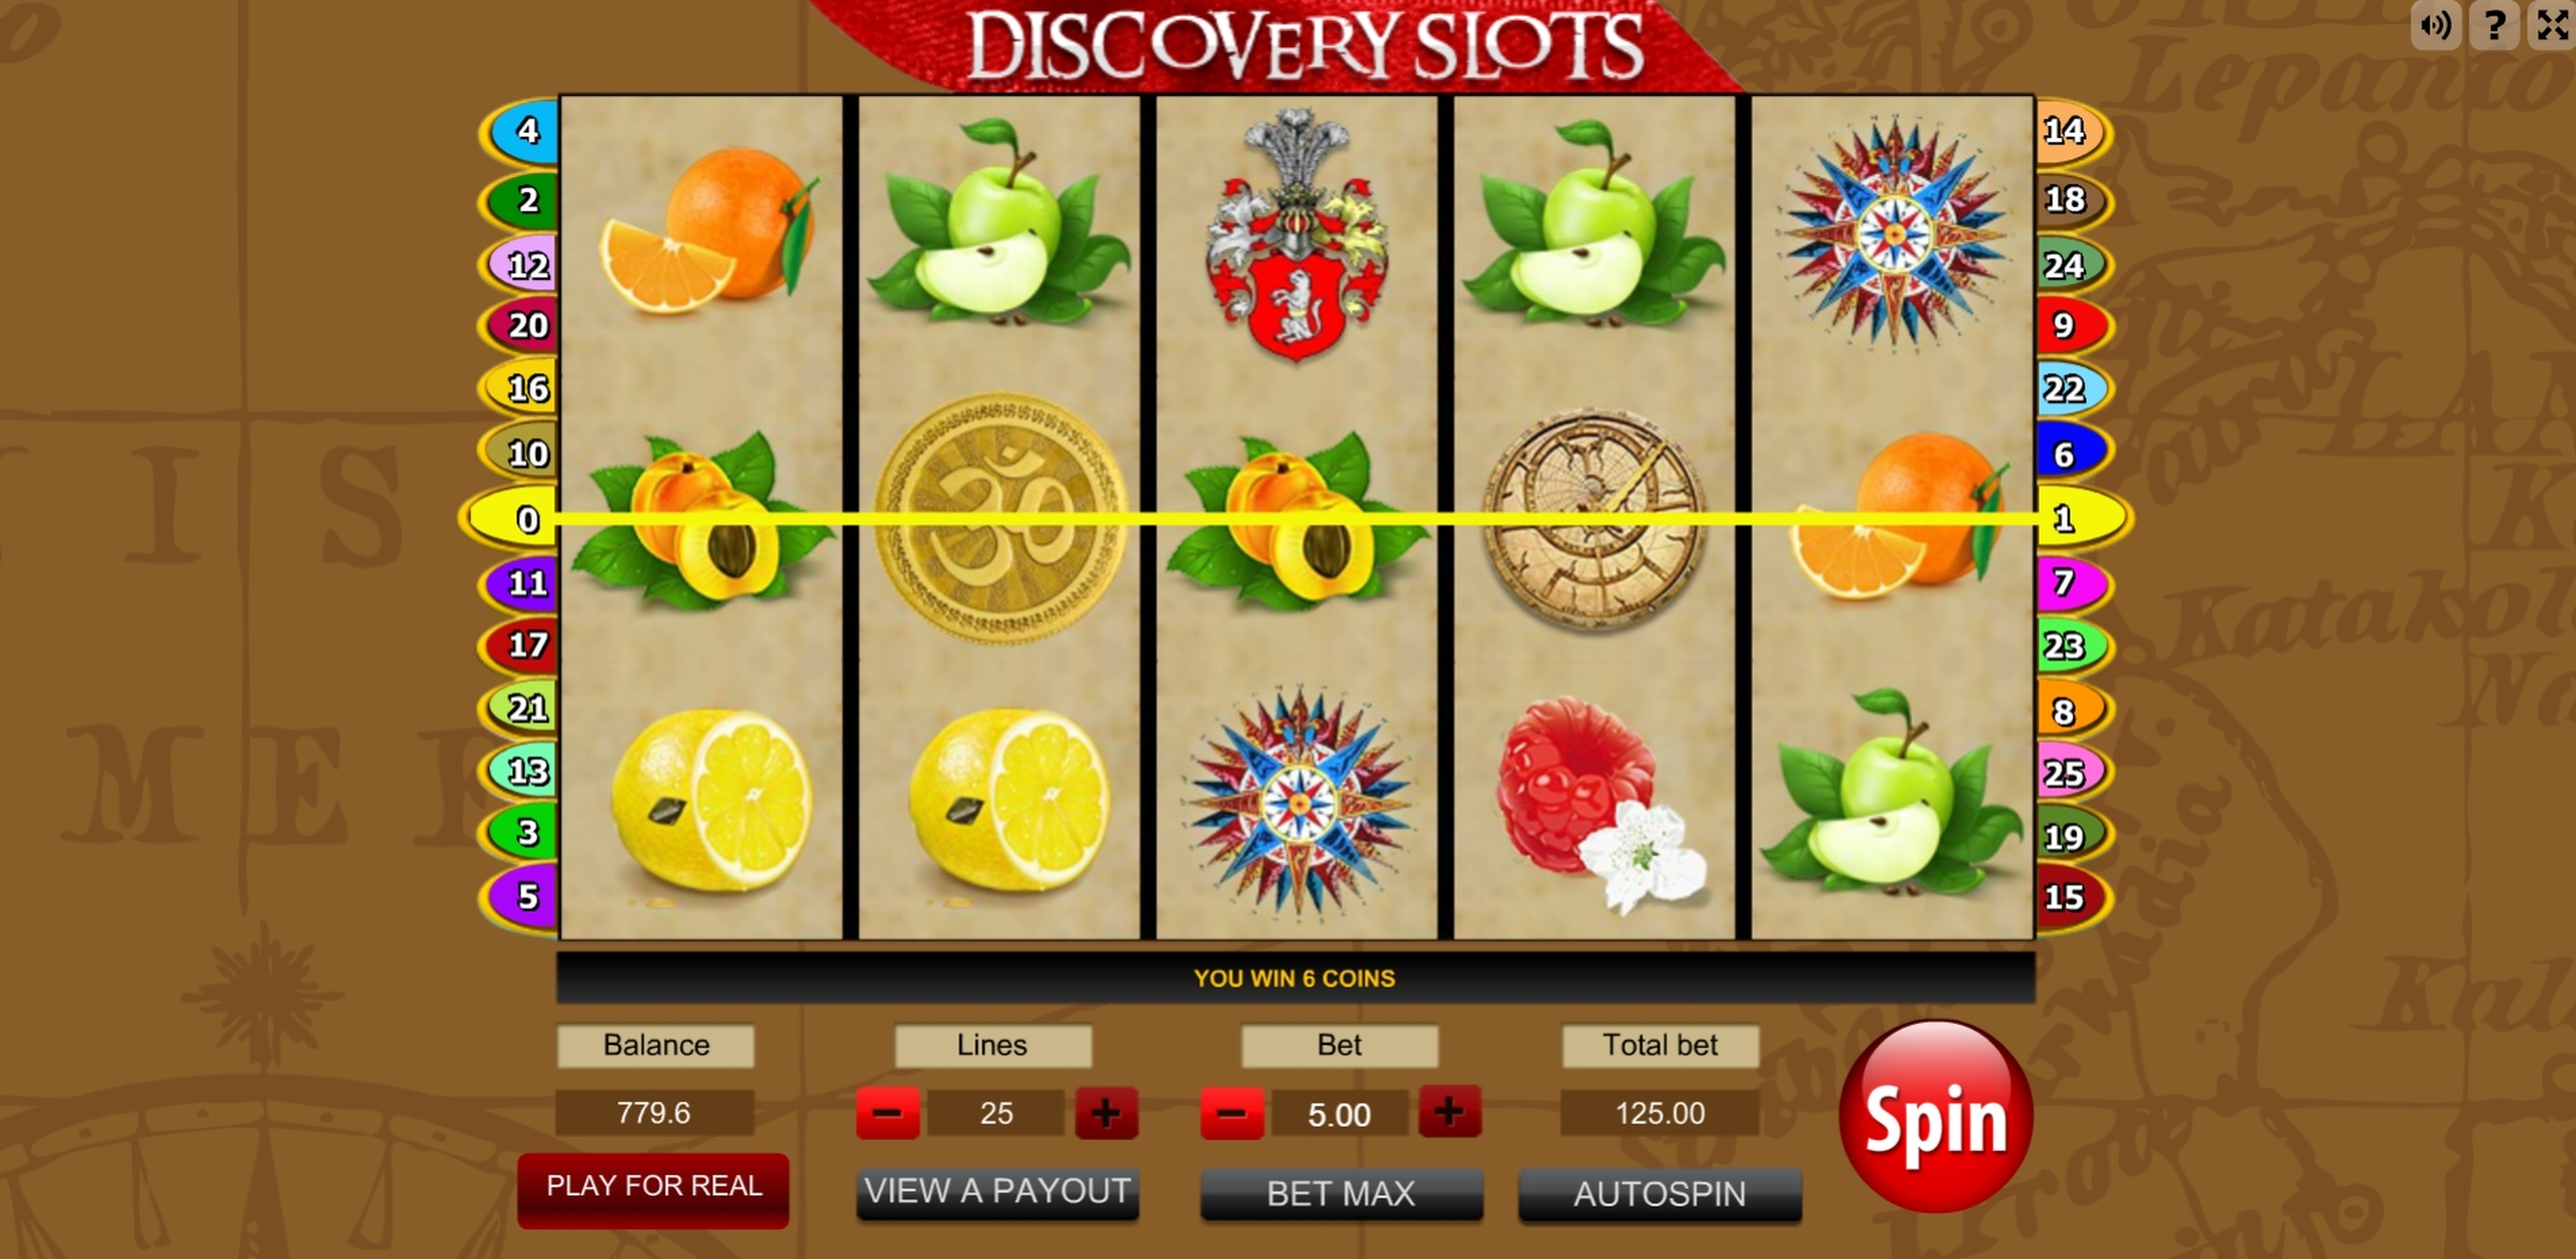 Win Money in Discovery Slots Free Slot Game by Gamescale Software